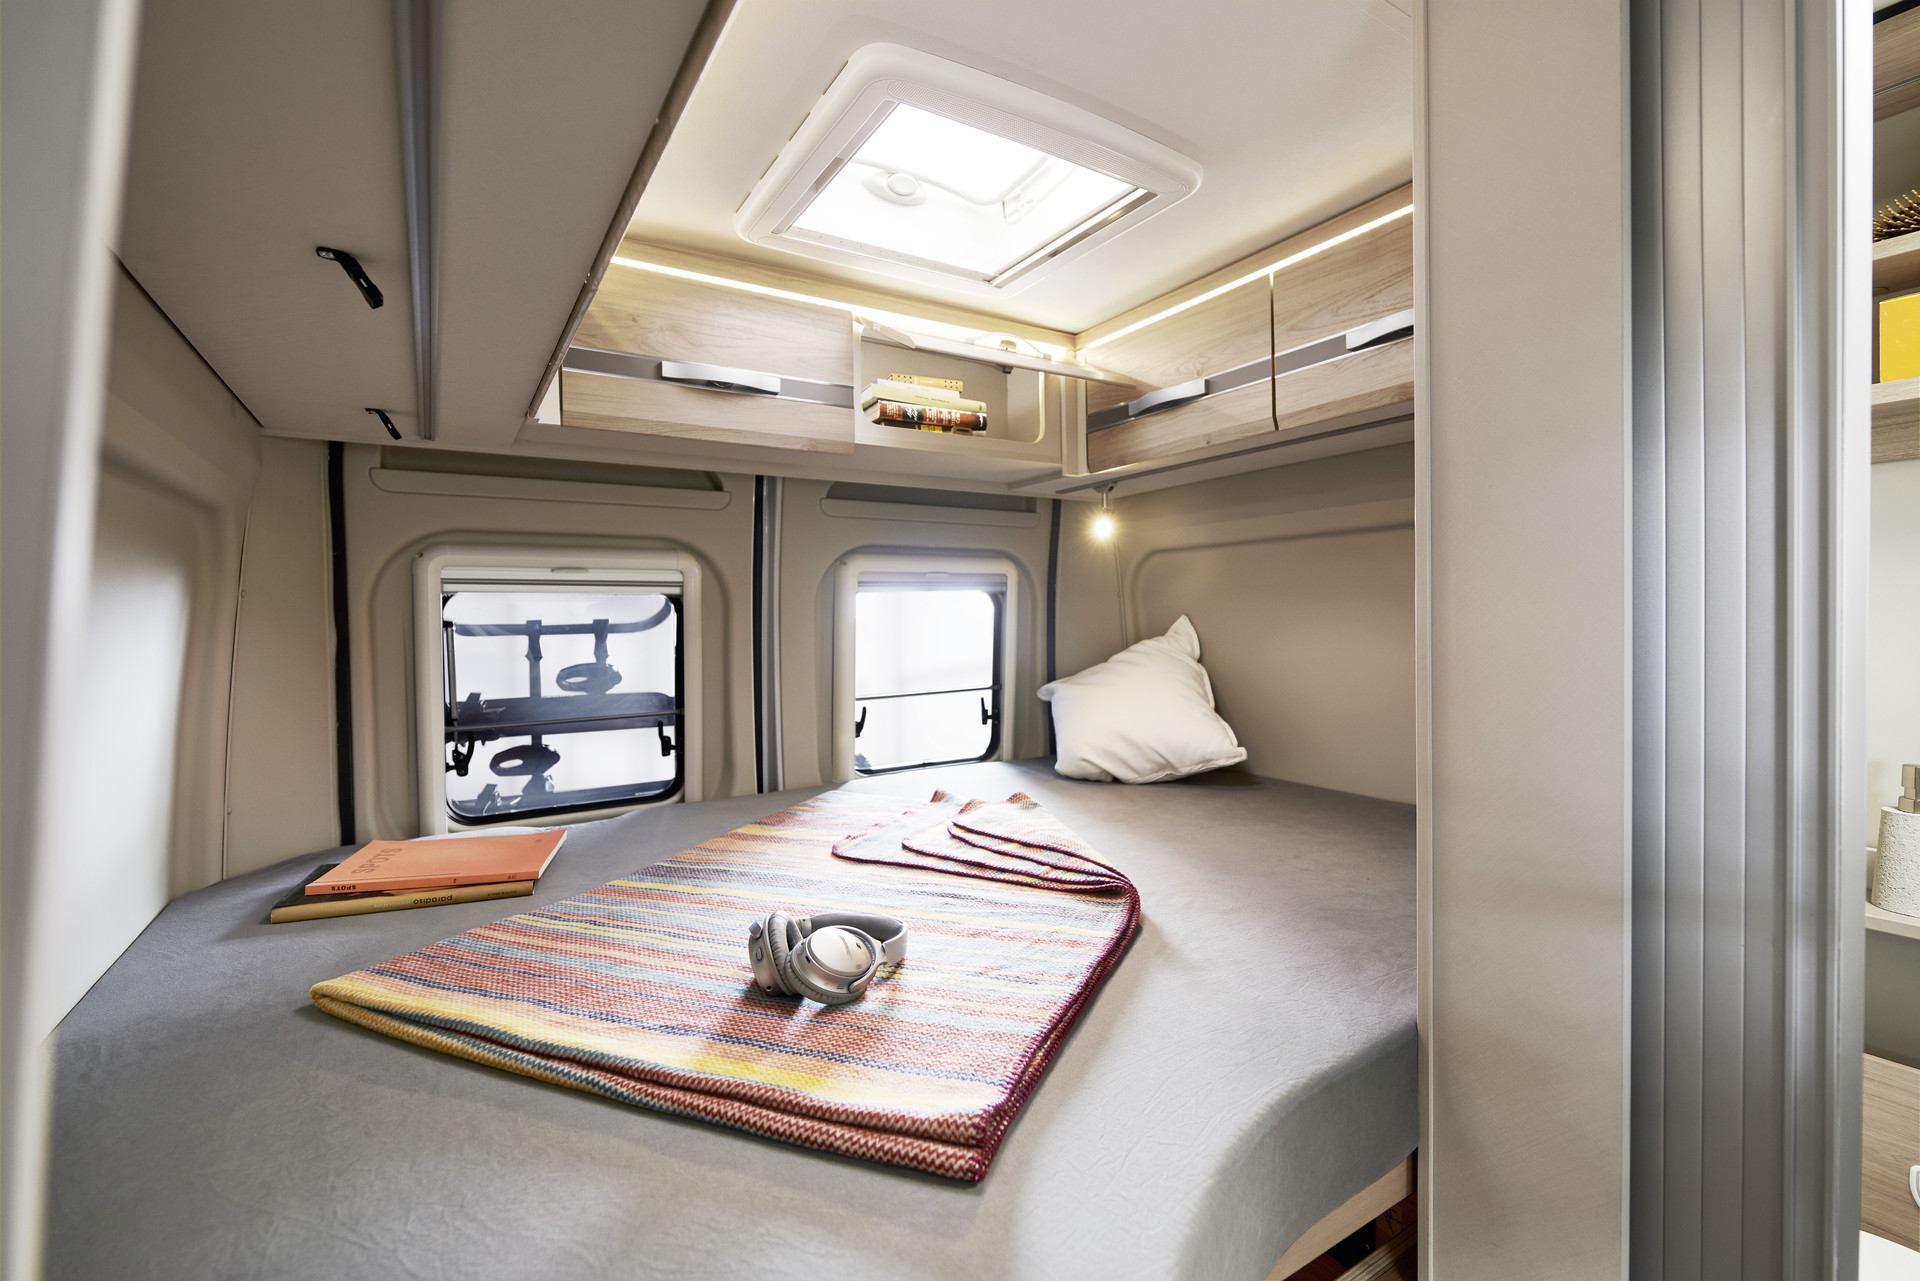 Double bed and oasis of relaxation in one. Of course, with a real folding slatted frame. The overhead lockers include ambient lighting that creates a pleasant mood.